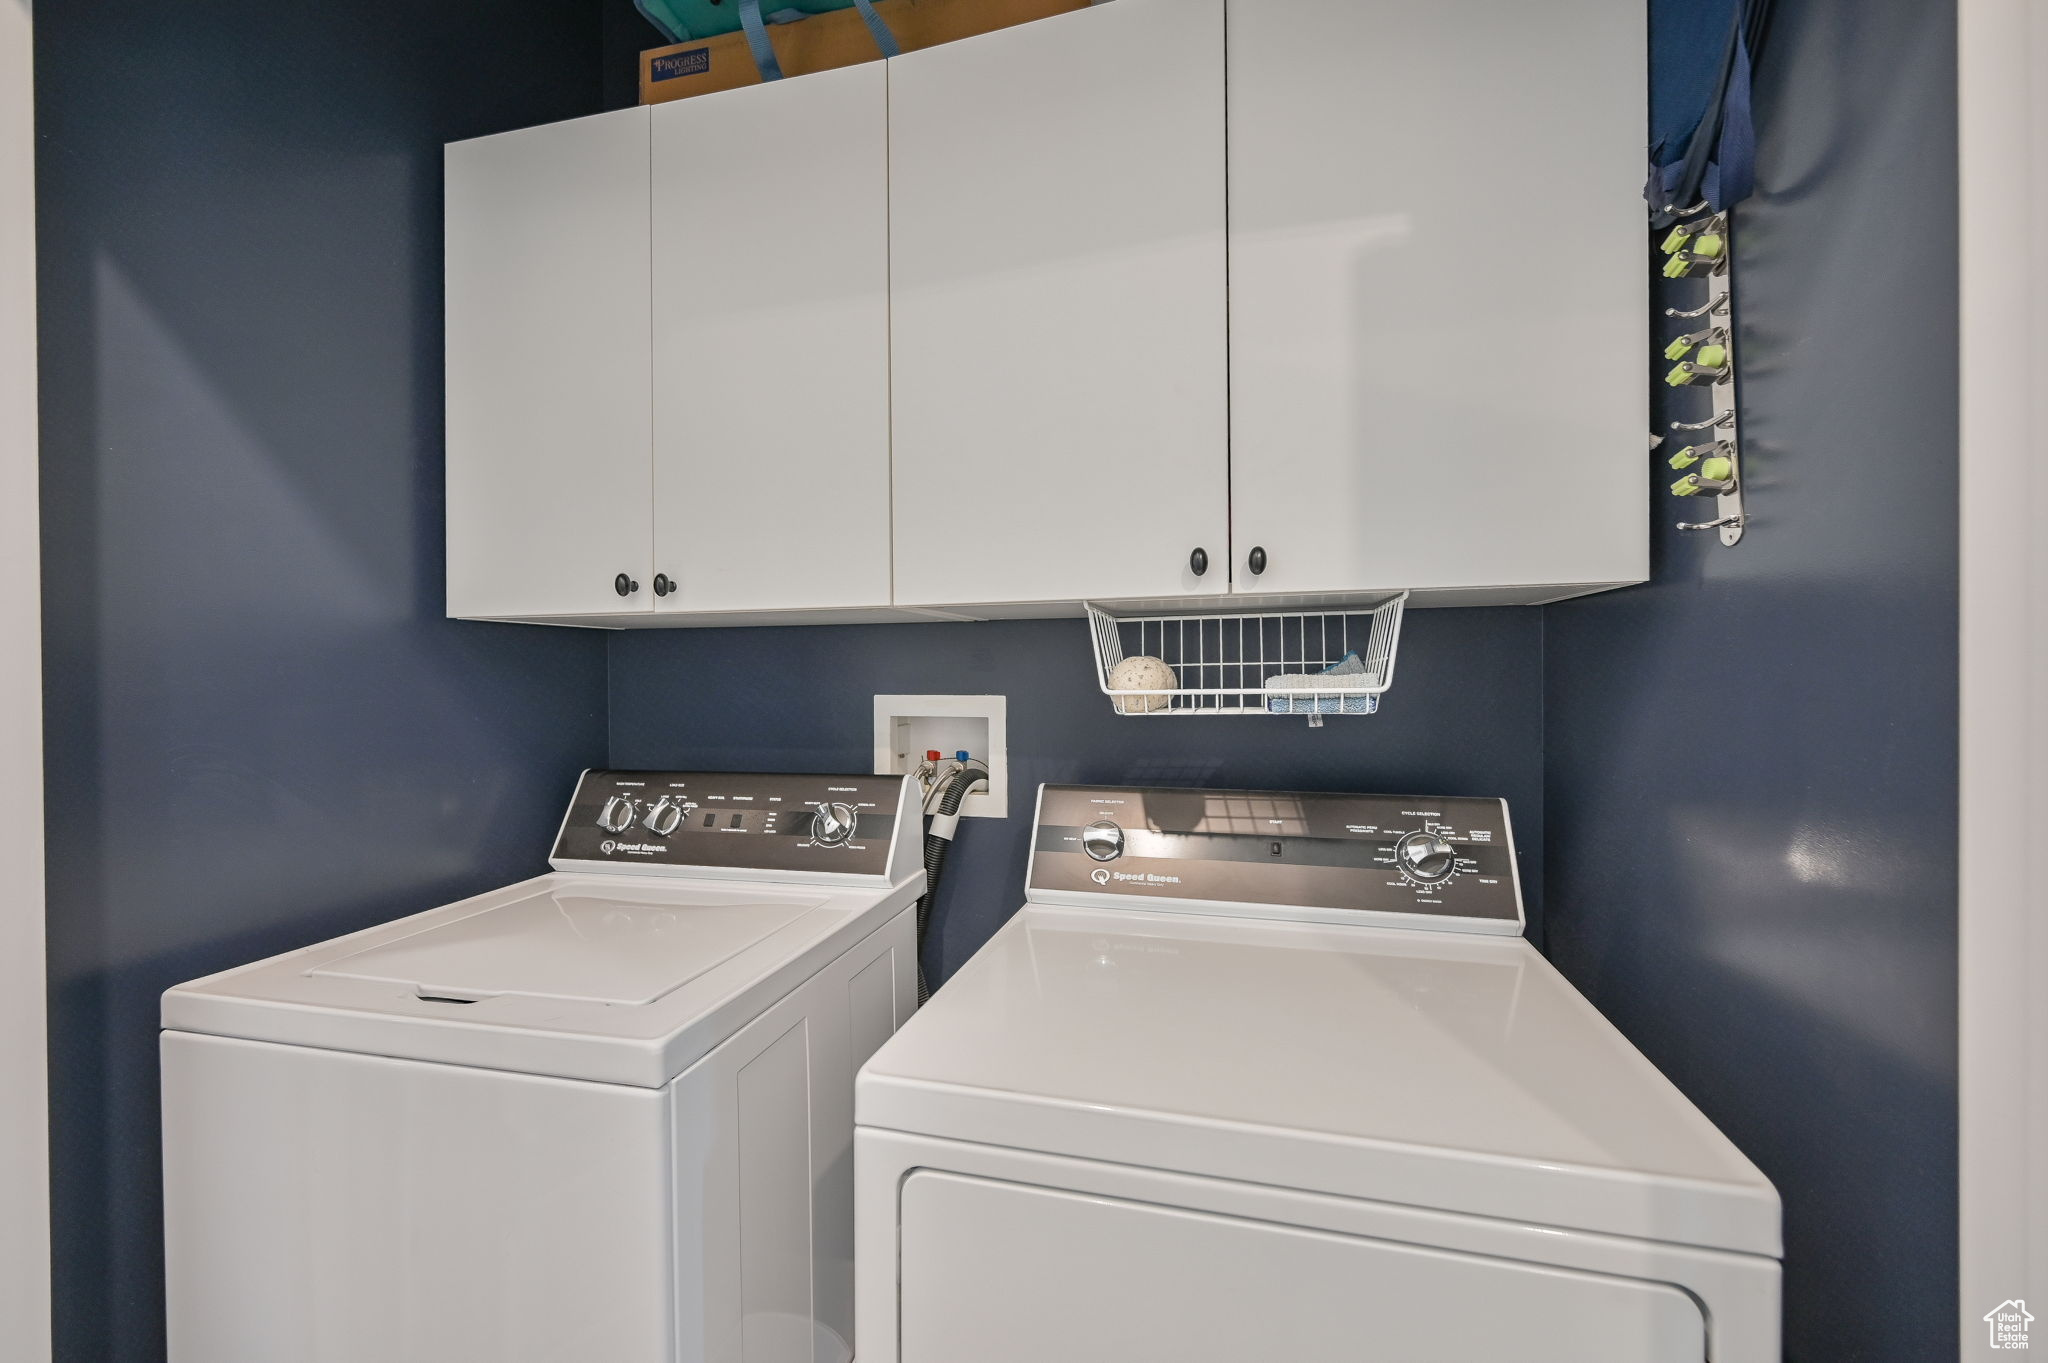 Laundry area with cabinets, washer hookup, and washing machine and clothes dryer